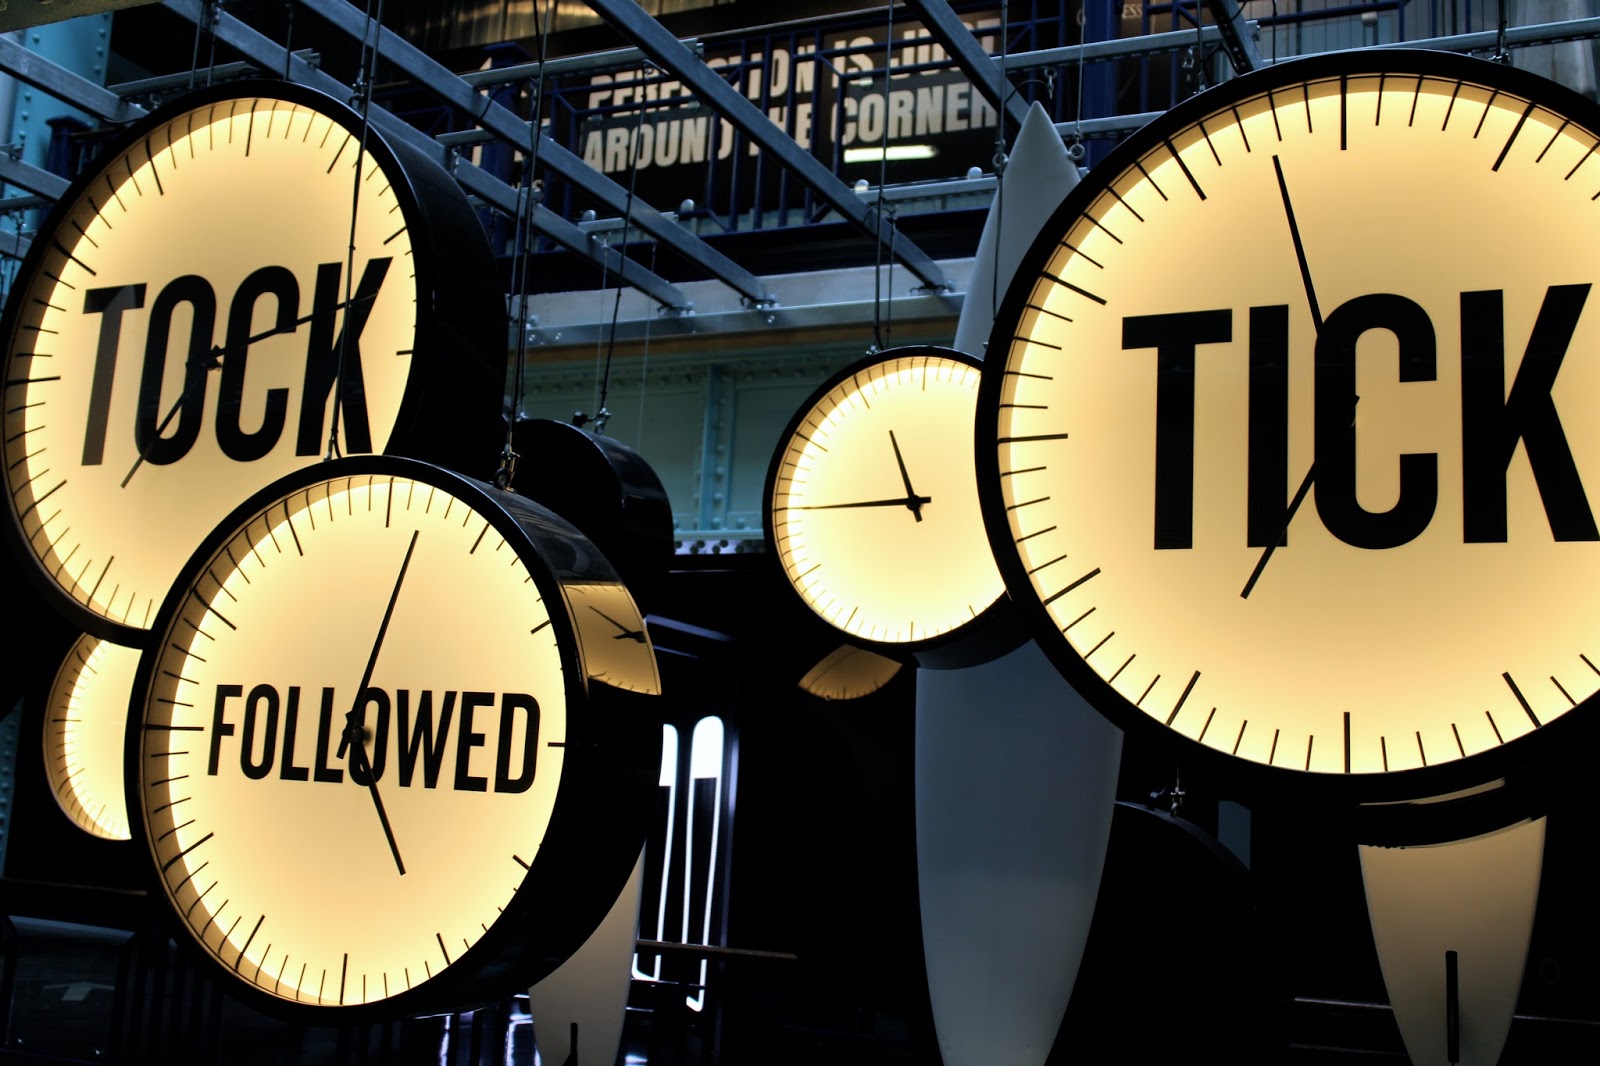 Tick tock - How to know when it's time for a change